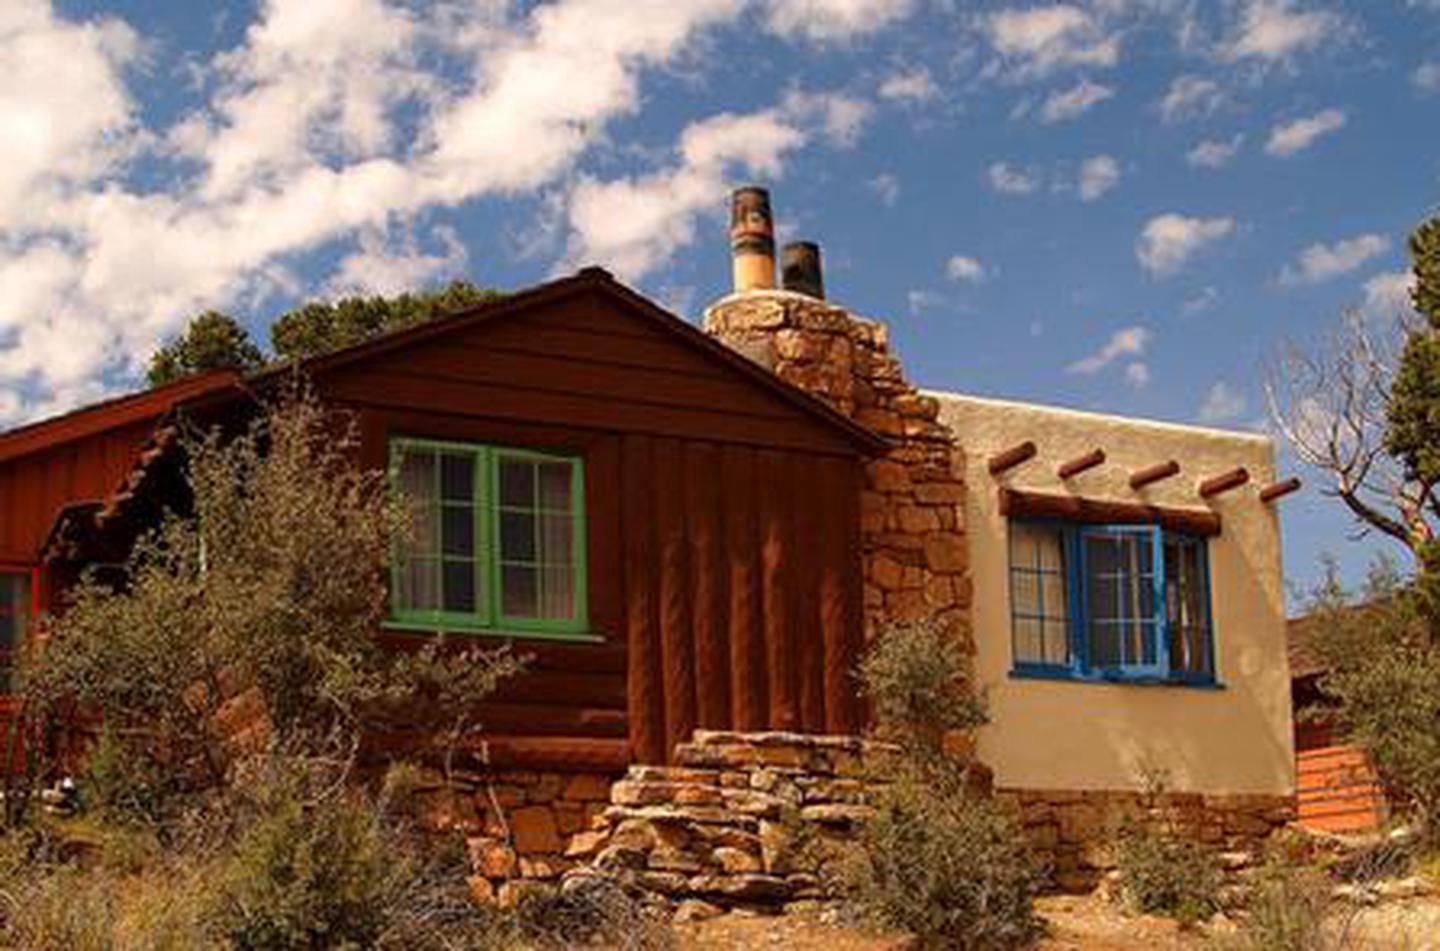 Historic Architecture To ensure a unique experience, guests can choose one of the historic cabins named for Buckey O'Neil and the Red Horse Ranch.